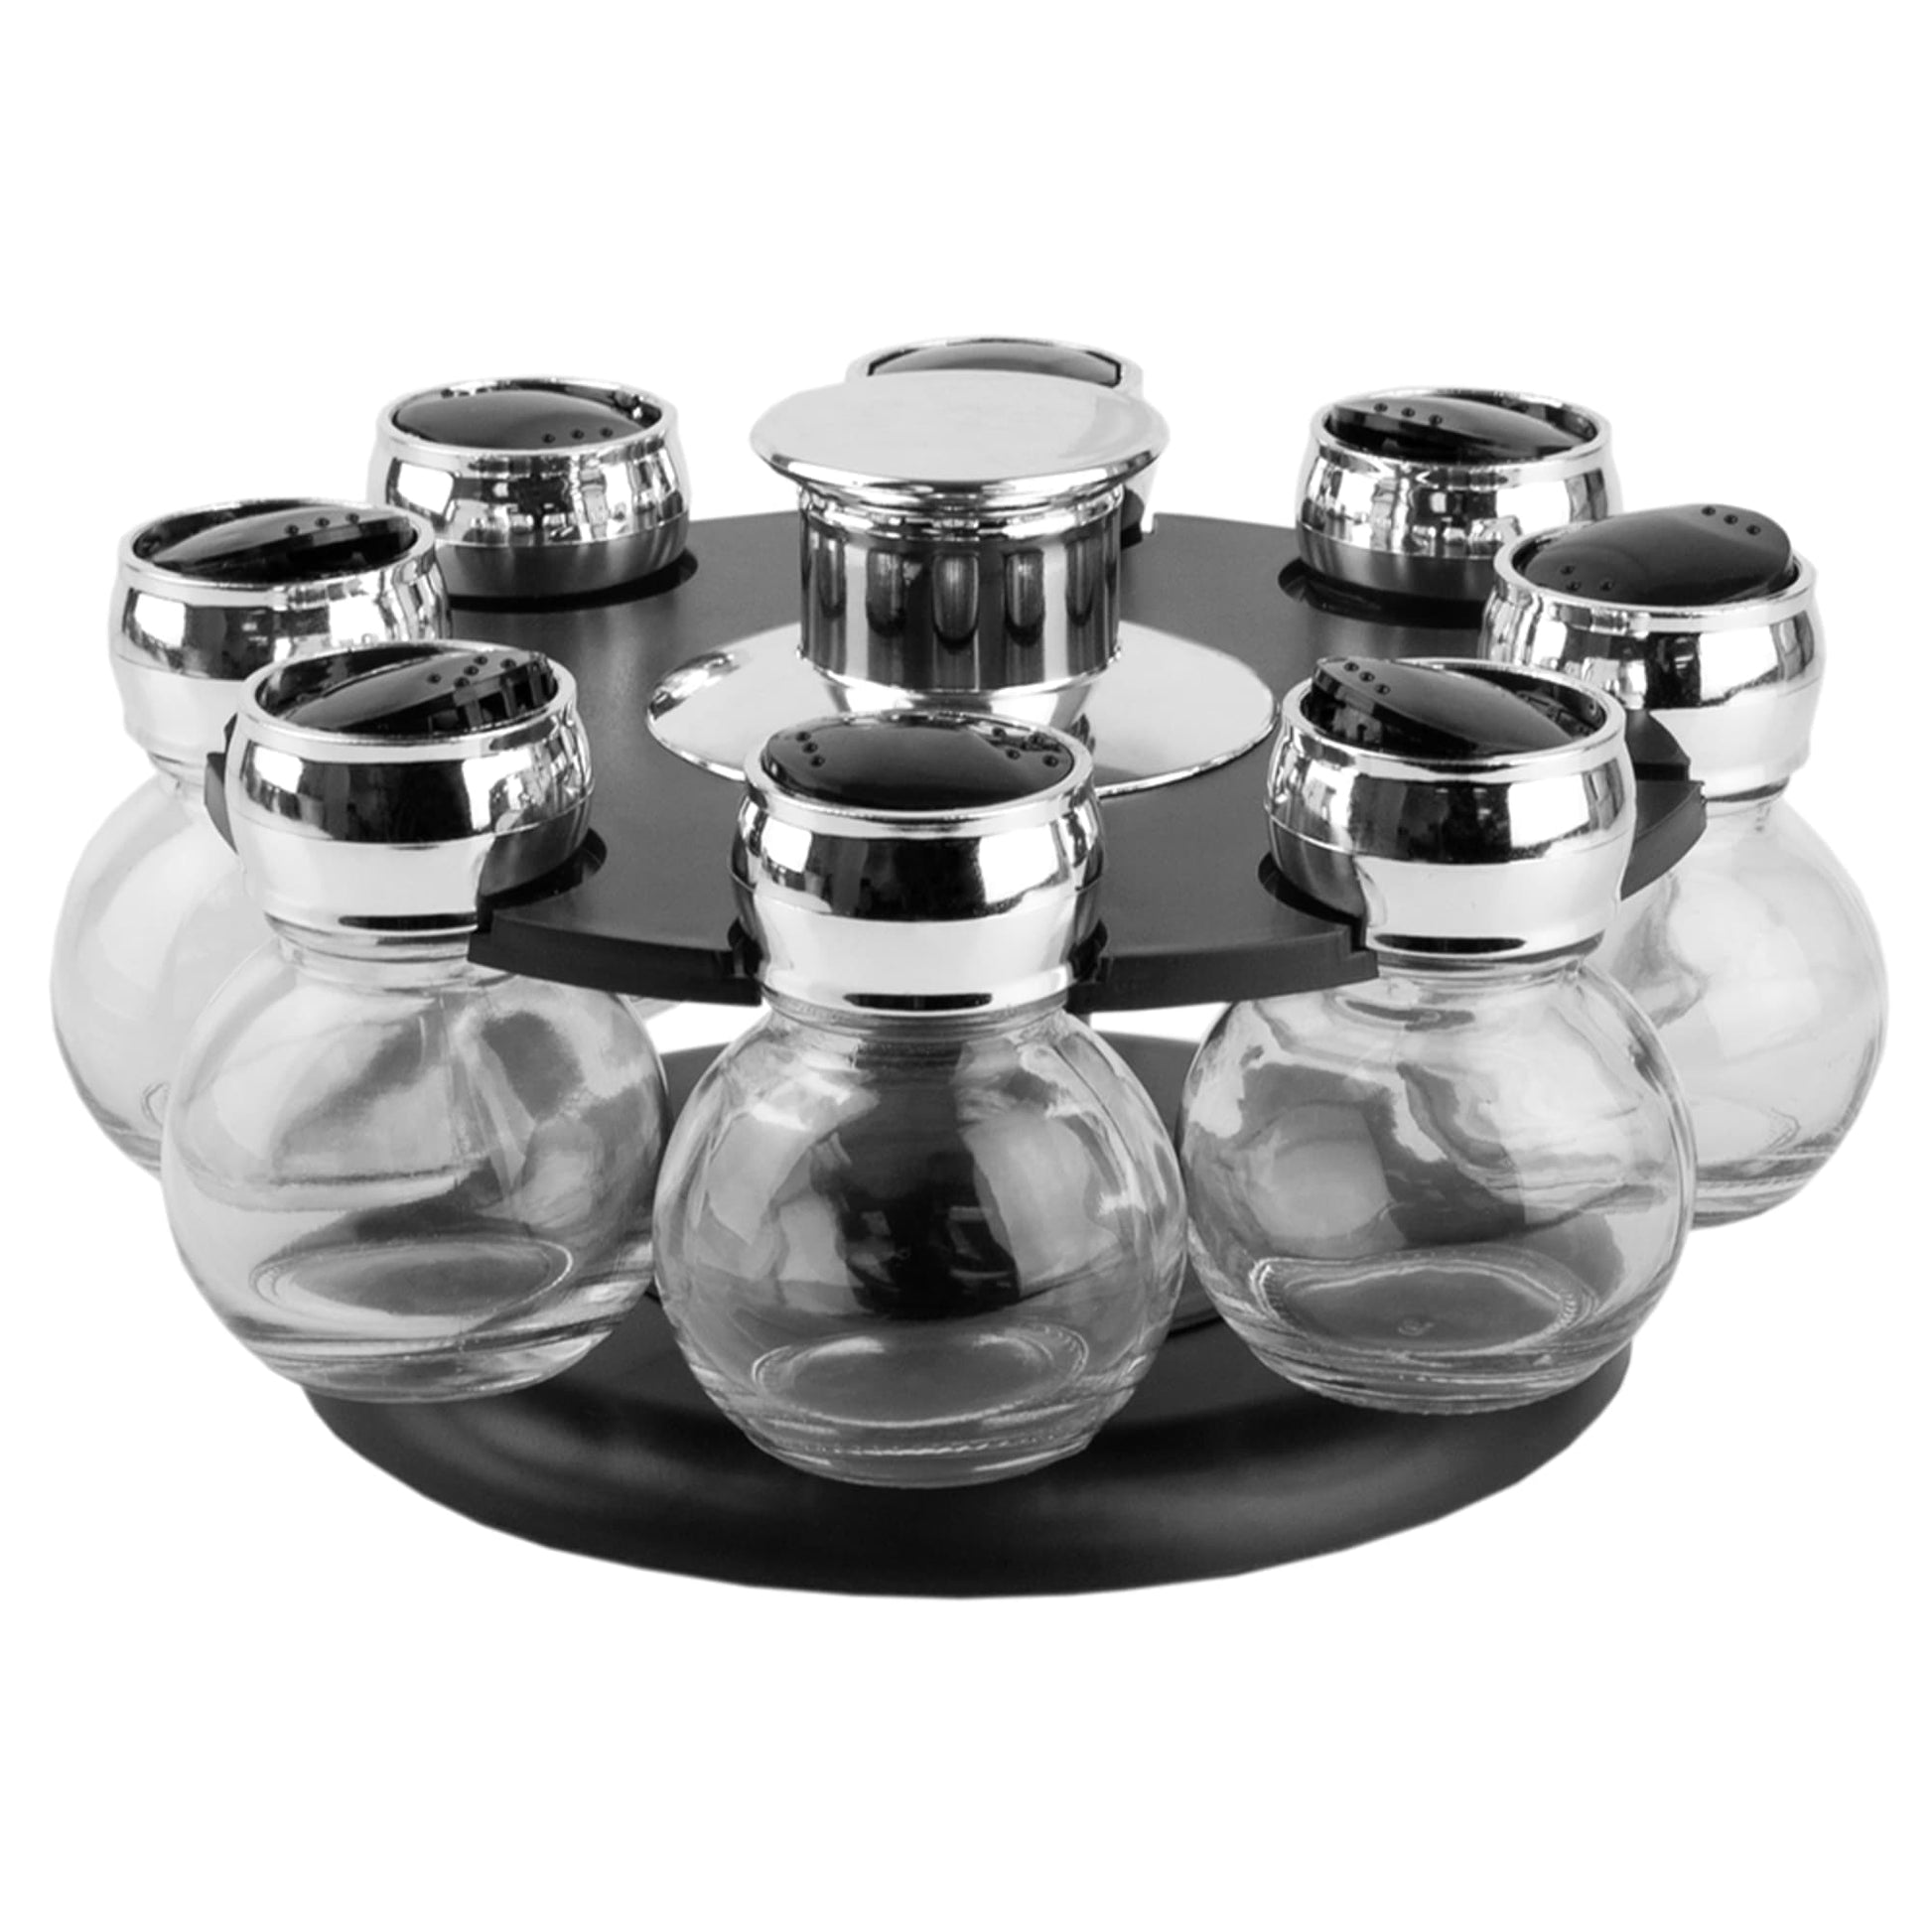 6-Jar Revolving Spice Rack, Spices and Seasonings Sets with Rack